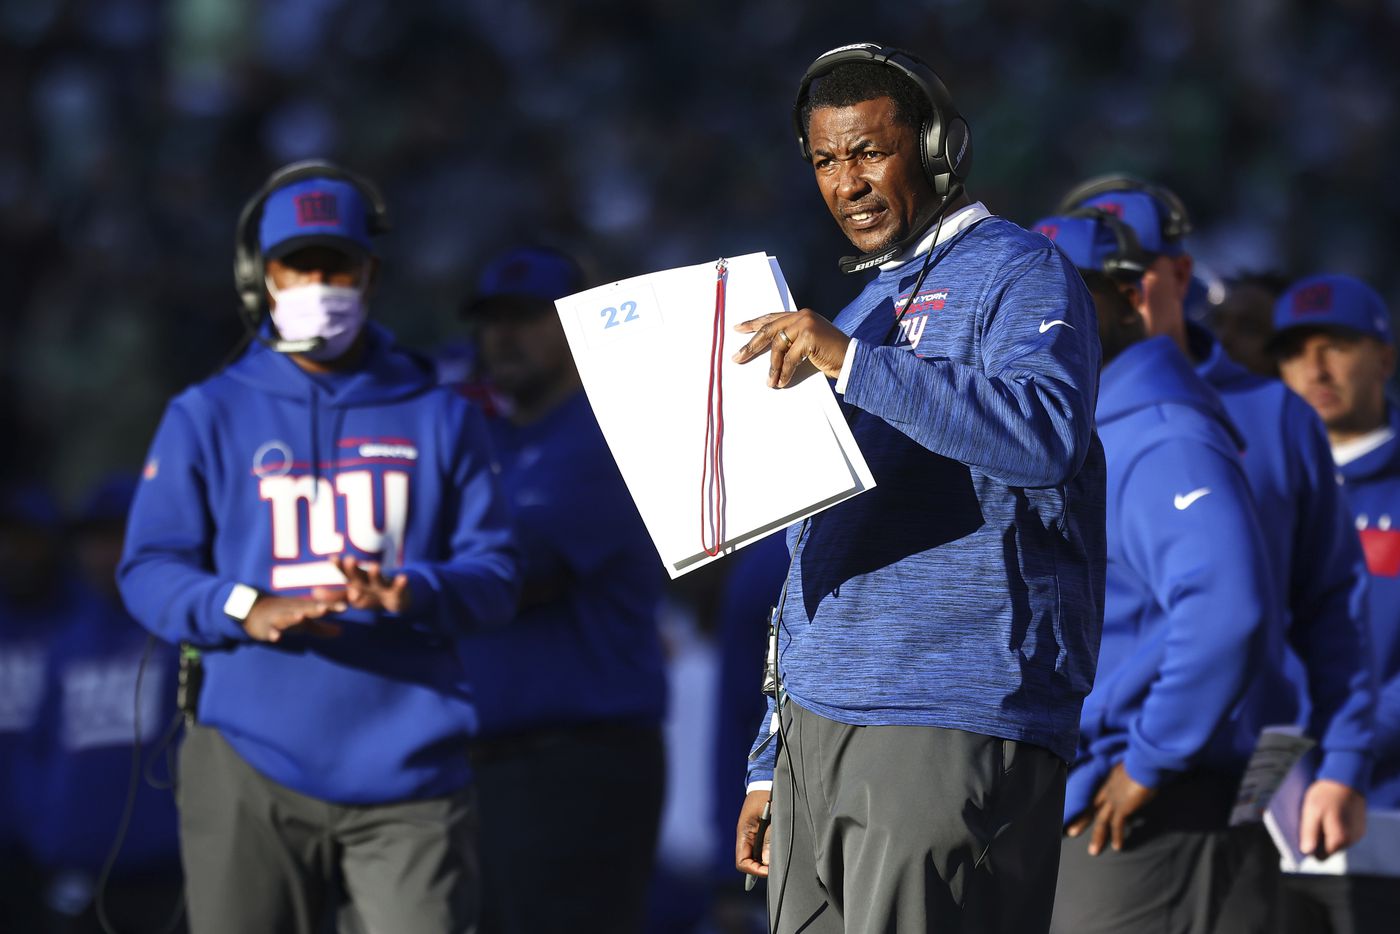 Giants defensive coordinator Patrick Graham on the sidelines during a game against the Eagles on Dec. 26, 2021.